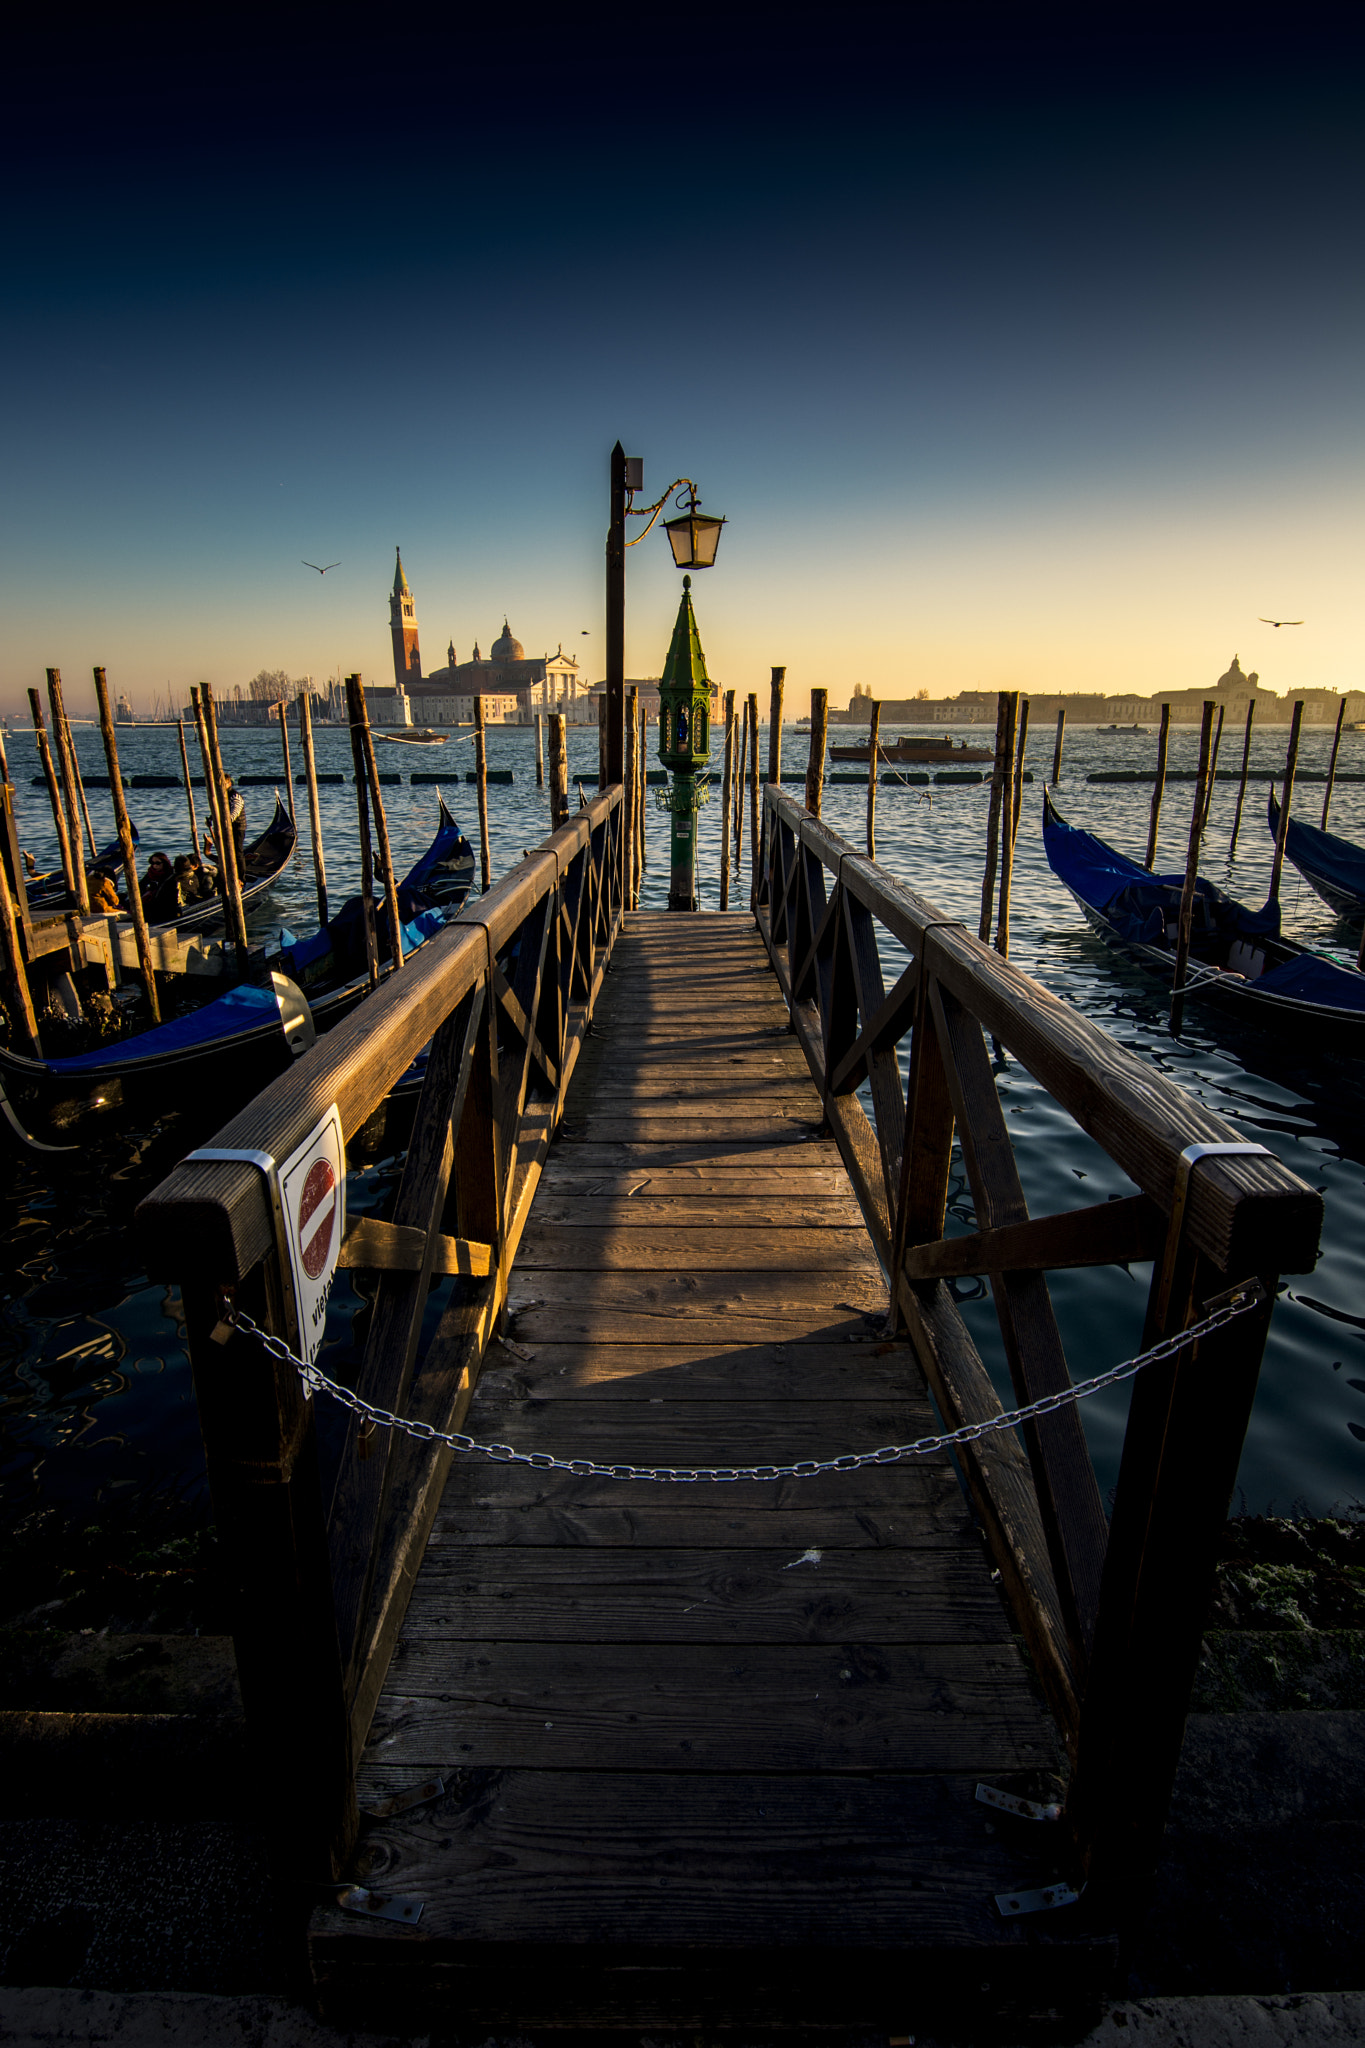 Nikon D7100 + Tokina AT-X 11-20 F2.8 PRO DX (AF 11-20mm f/2.8) sample photo. Last lights of the lagoon photography